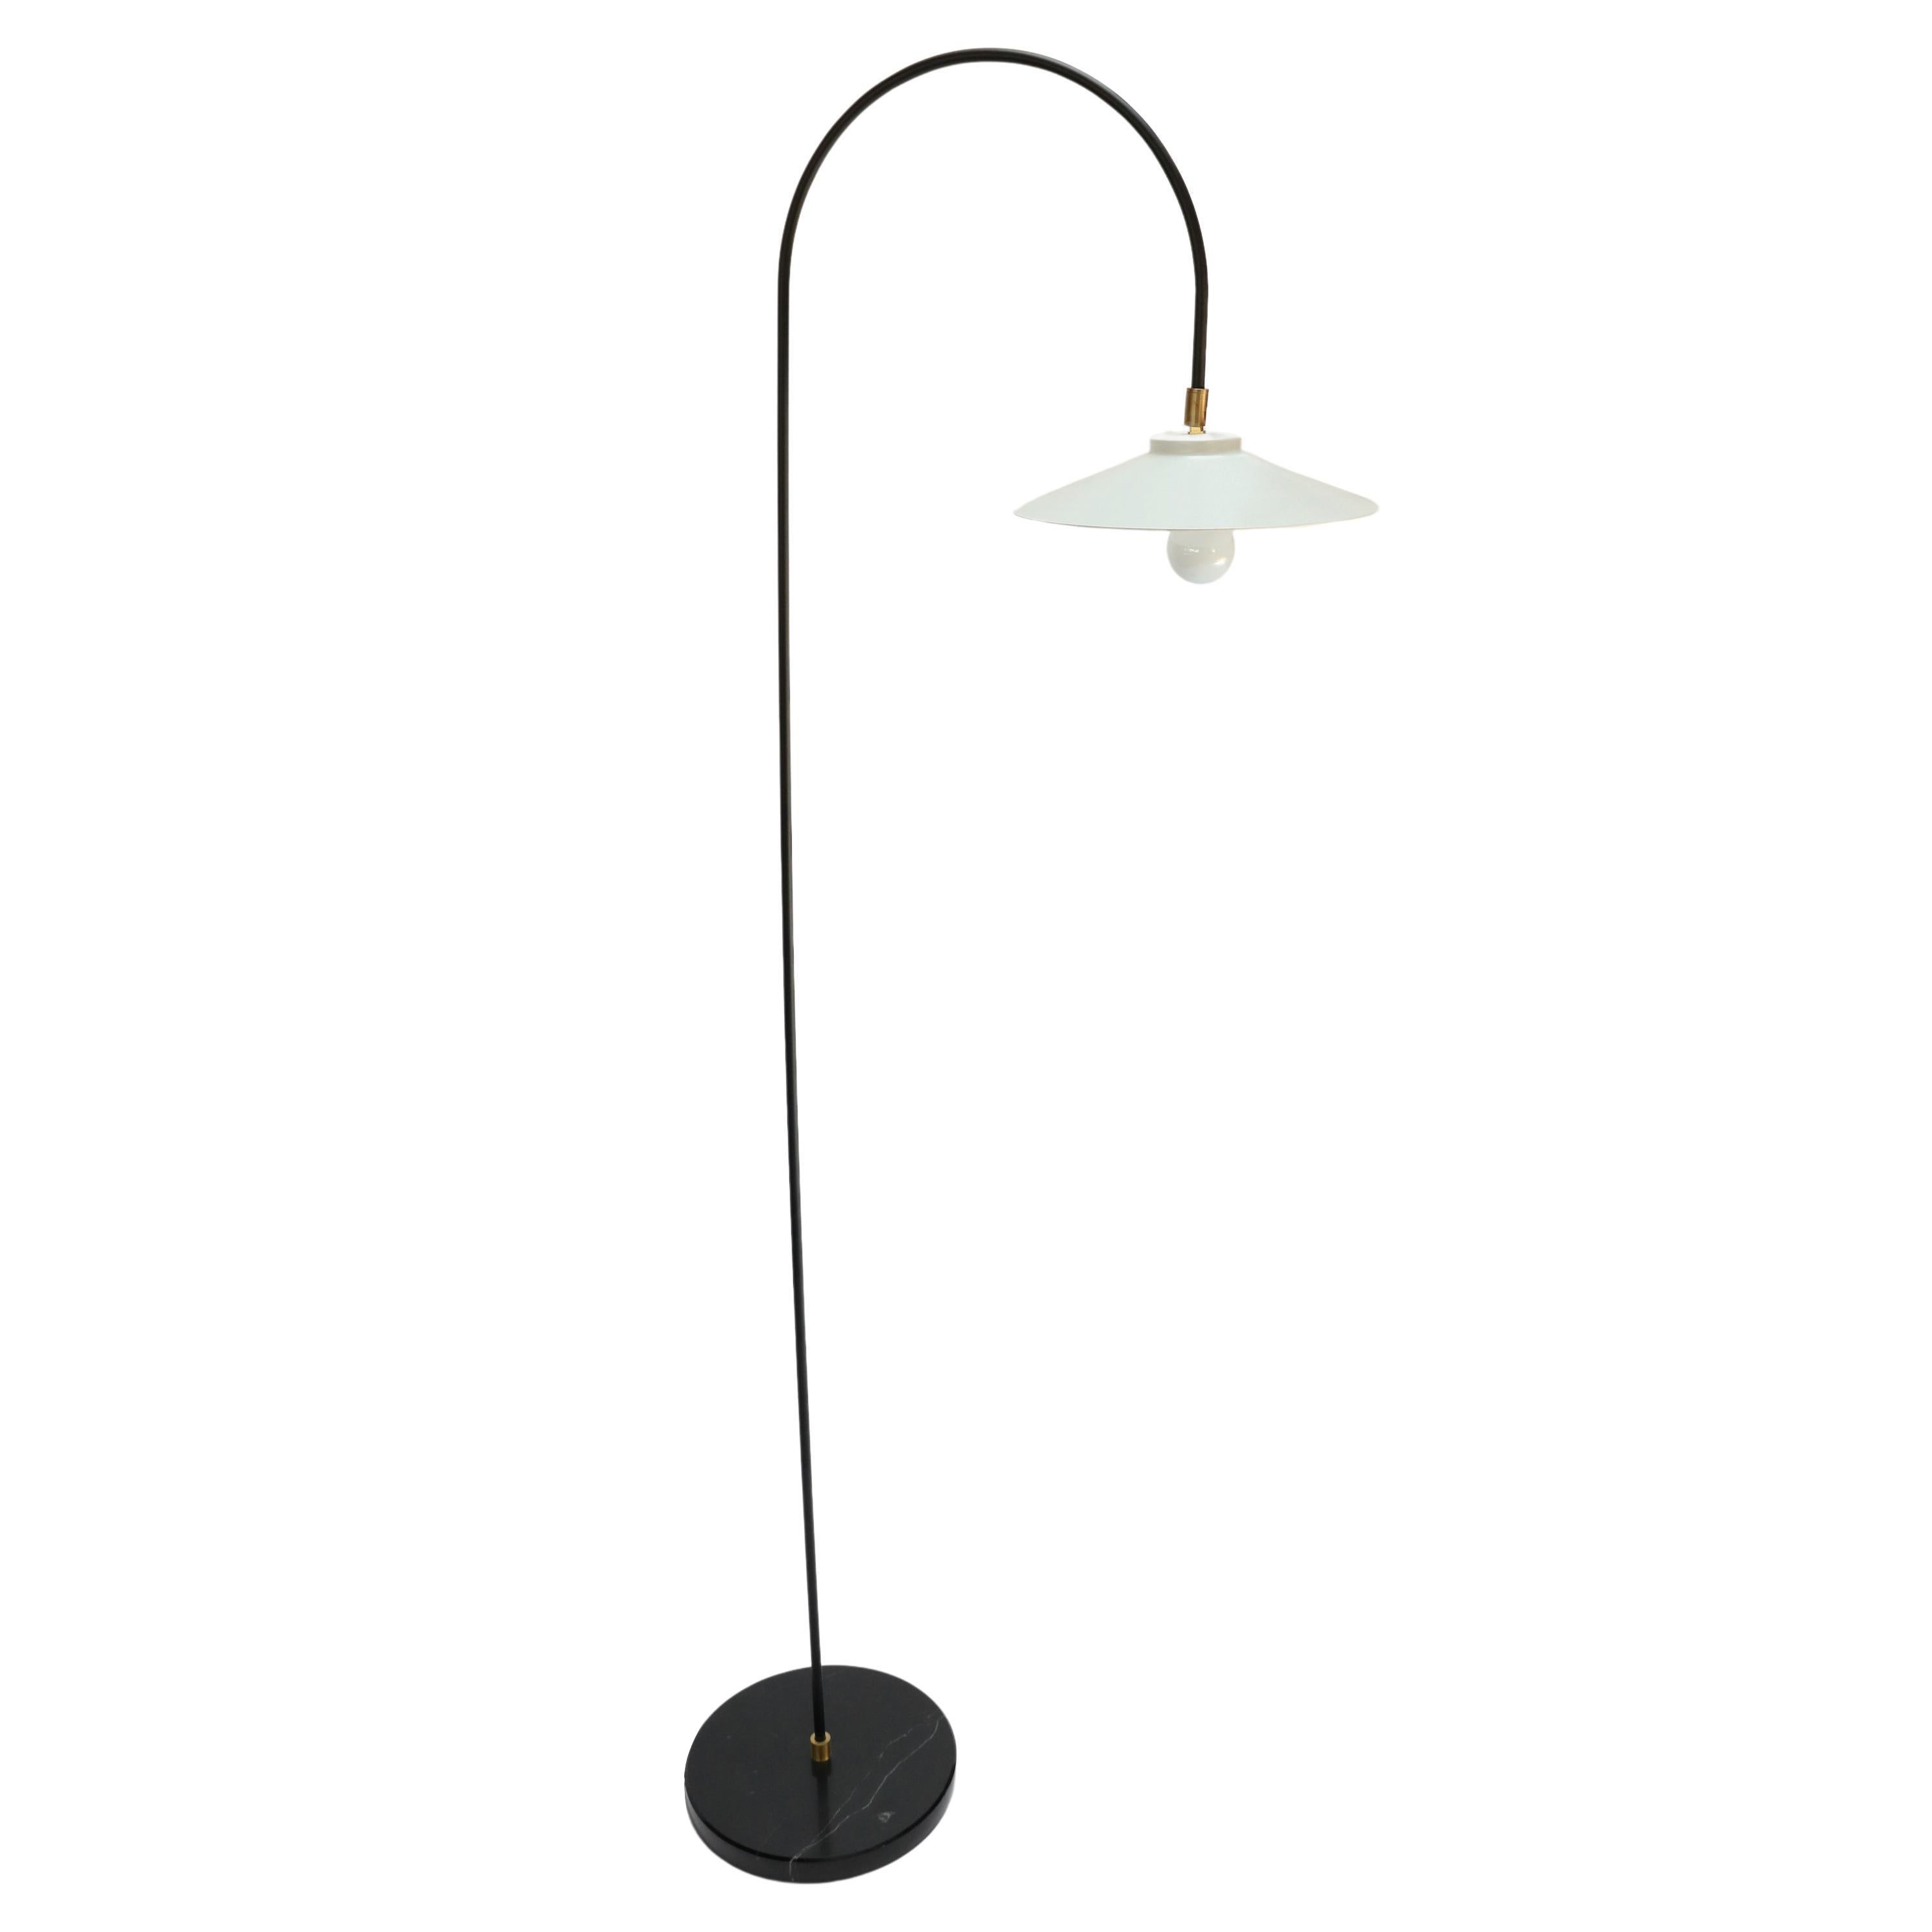 Custom Black & White Metal Mid Century Style Arch Floor Lamp By Adesso Imports For Sale